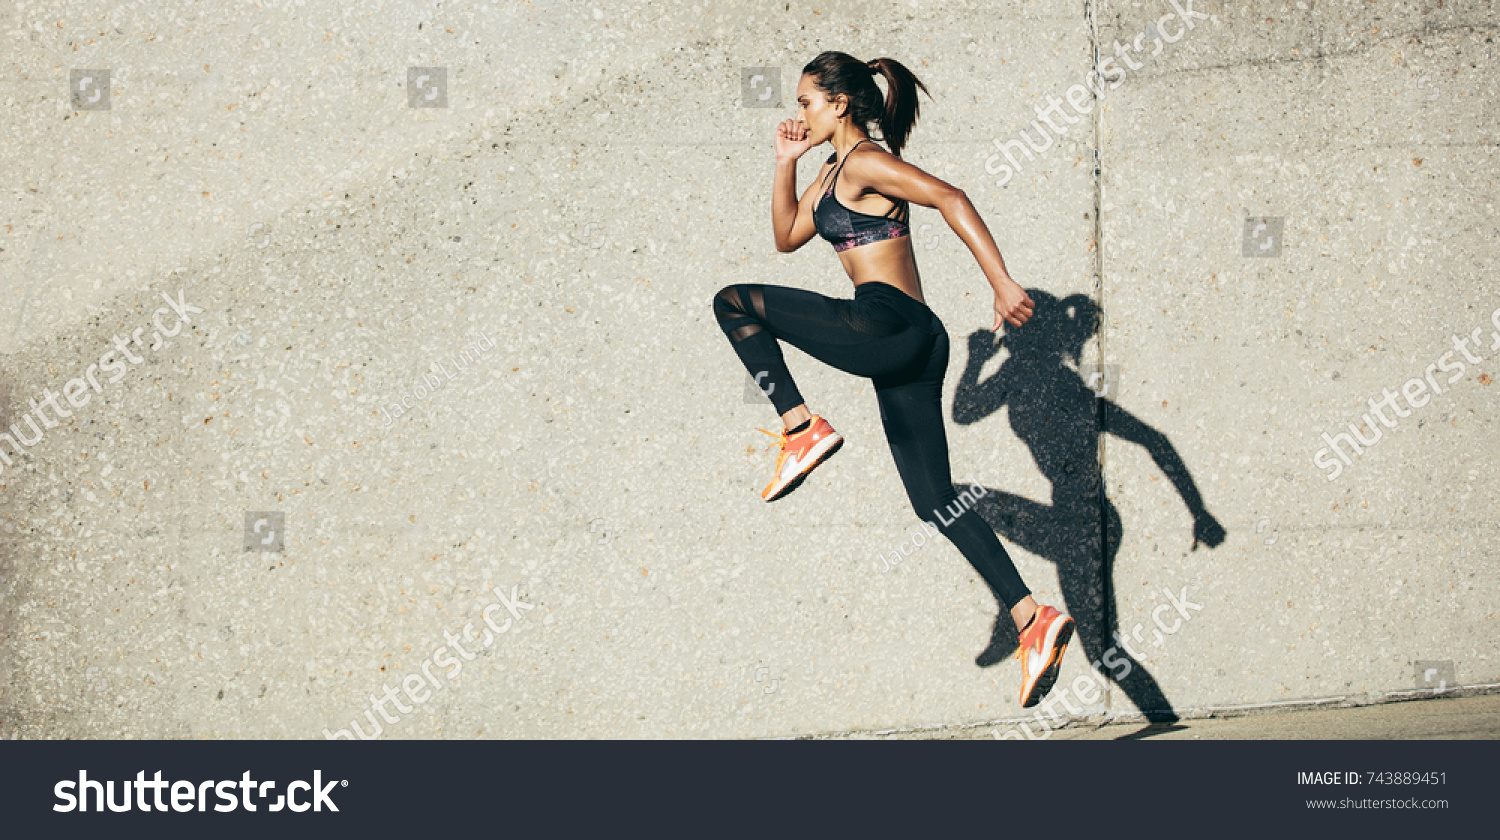 Fit woman exercising outdoors. Healthy young female athlete doing fitness workout. #743889451